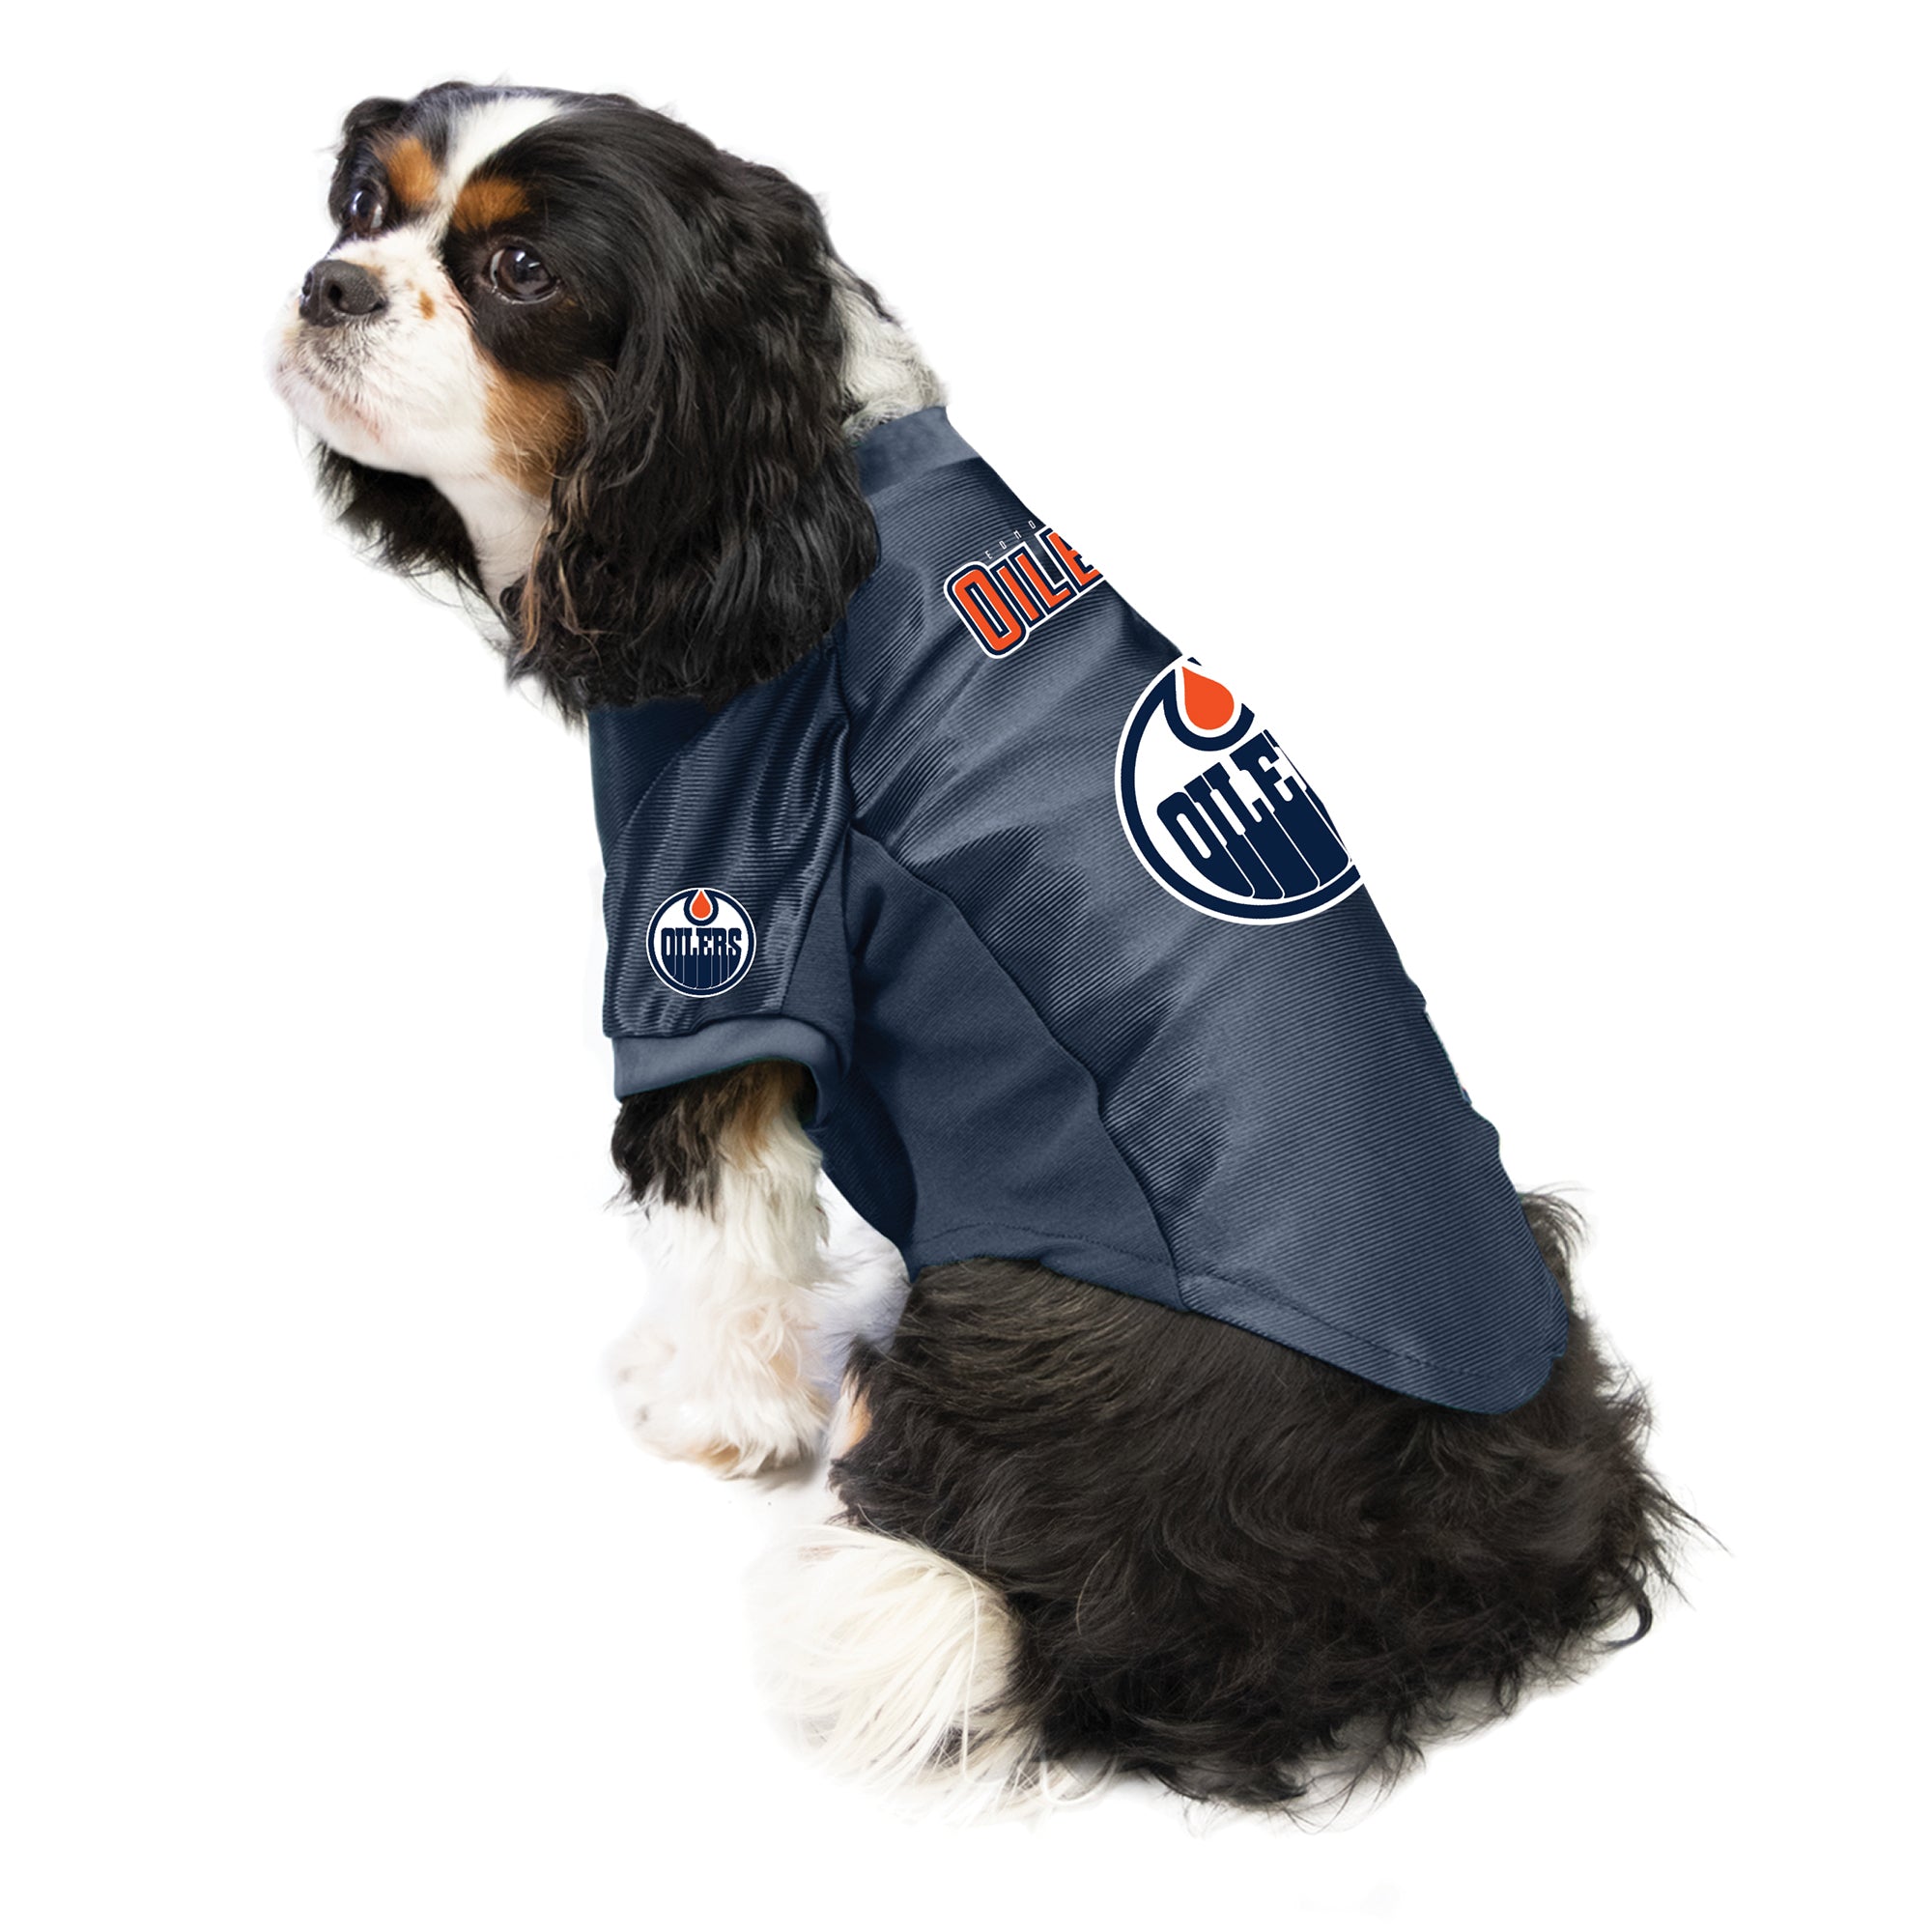 Edmonton Oilers Dog Jersey - SMALL - Navy - Official NHL Hockey - NWT